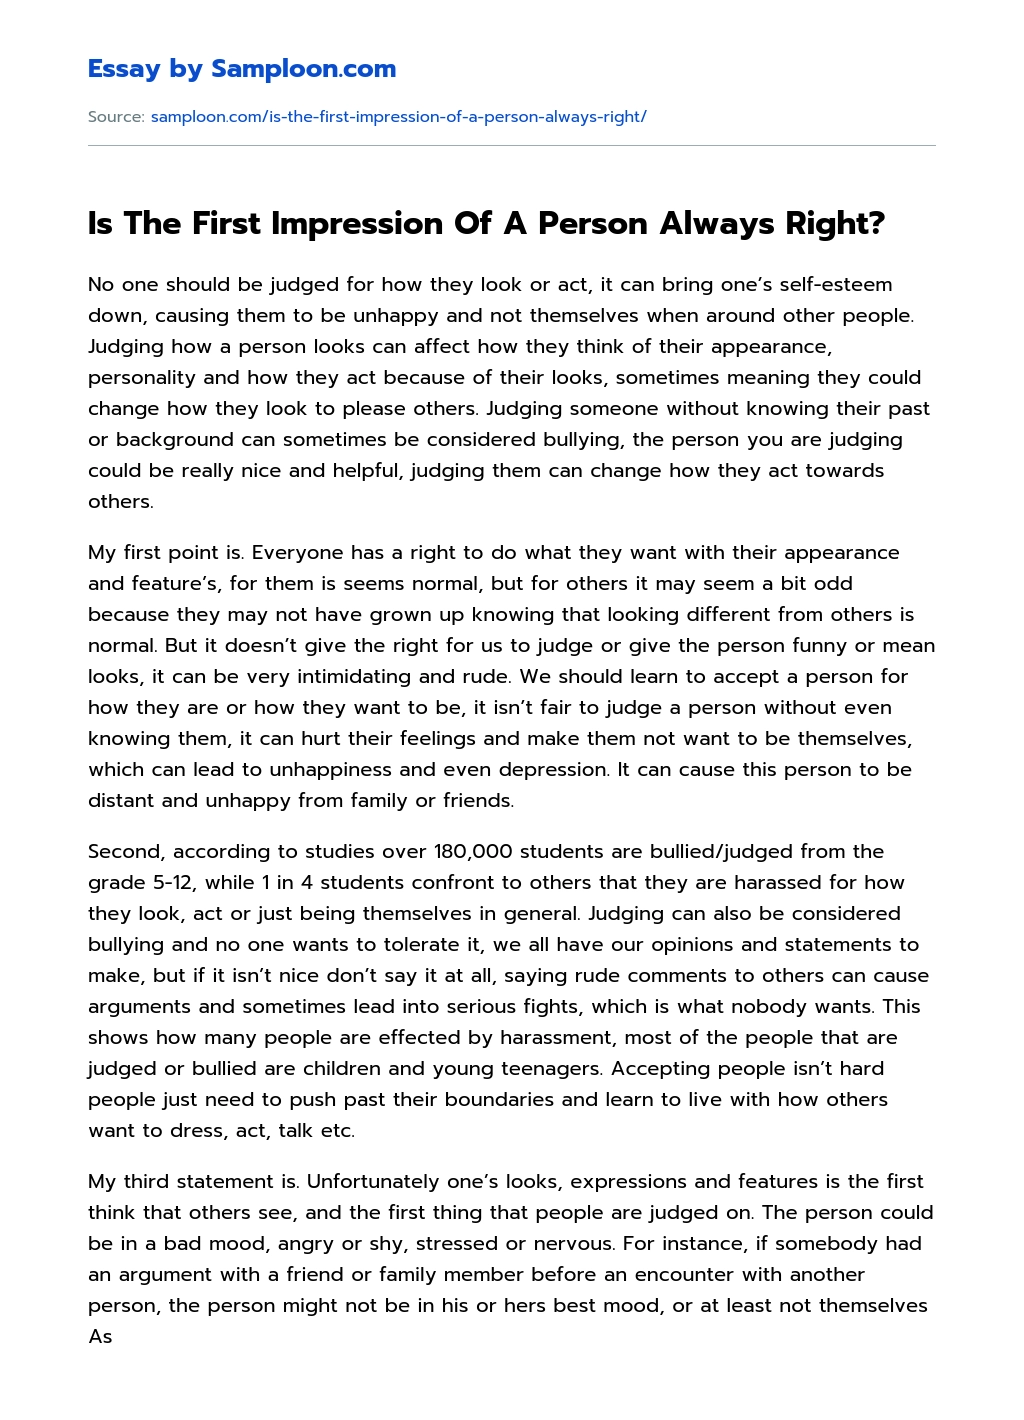 Is The First Impression Of A Person Always Right? essay